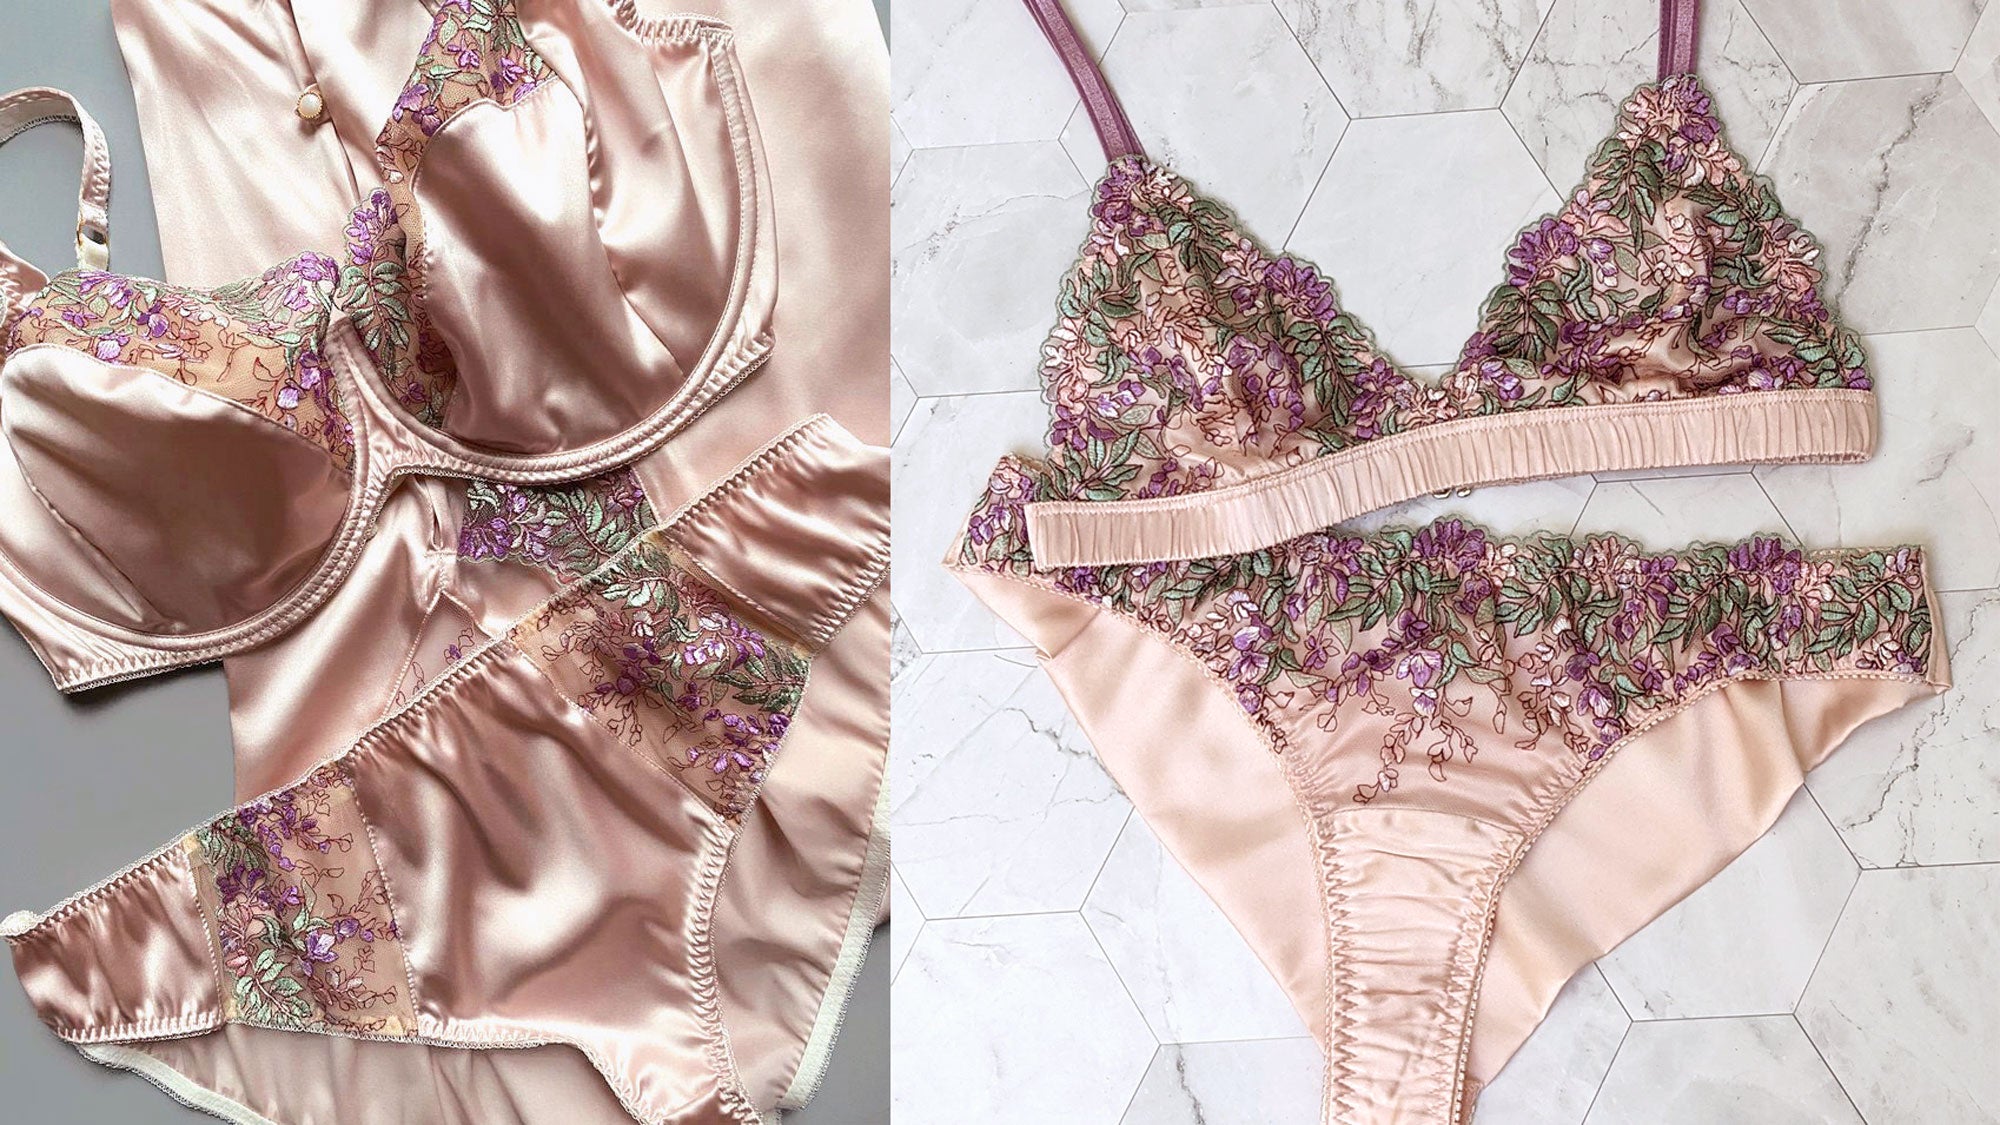 Pink silk lingerie sets by Harlow & Fox and Angela Friedman